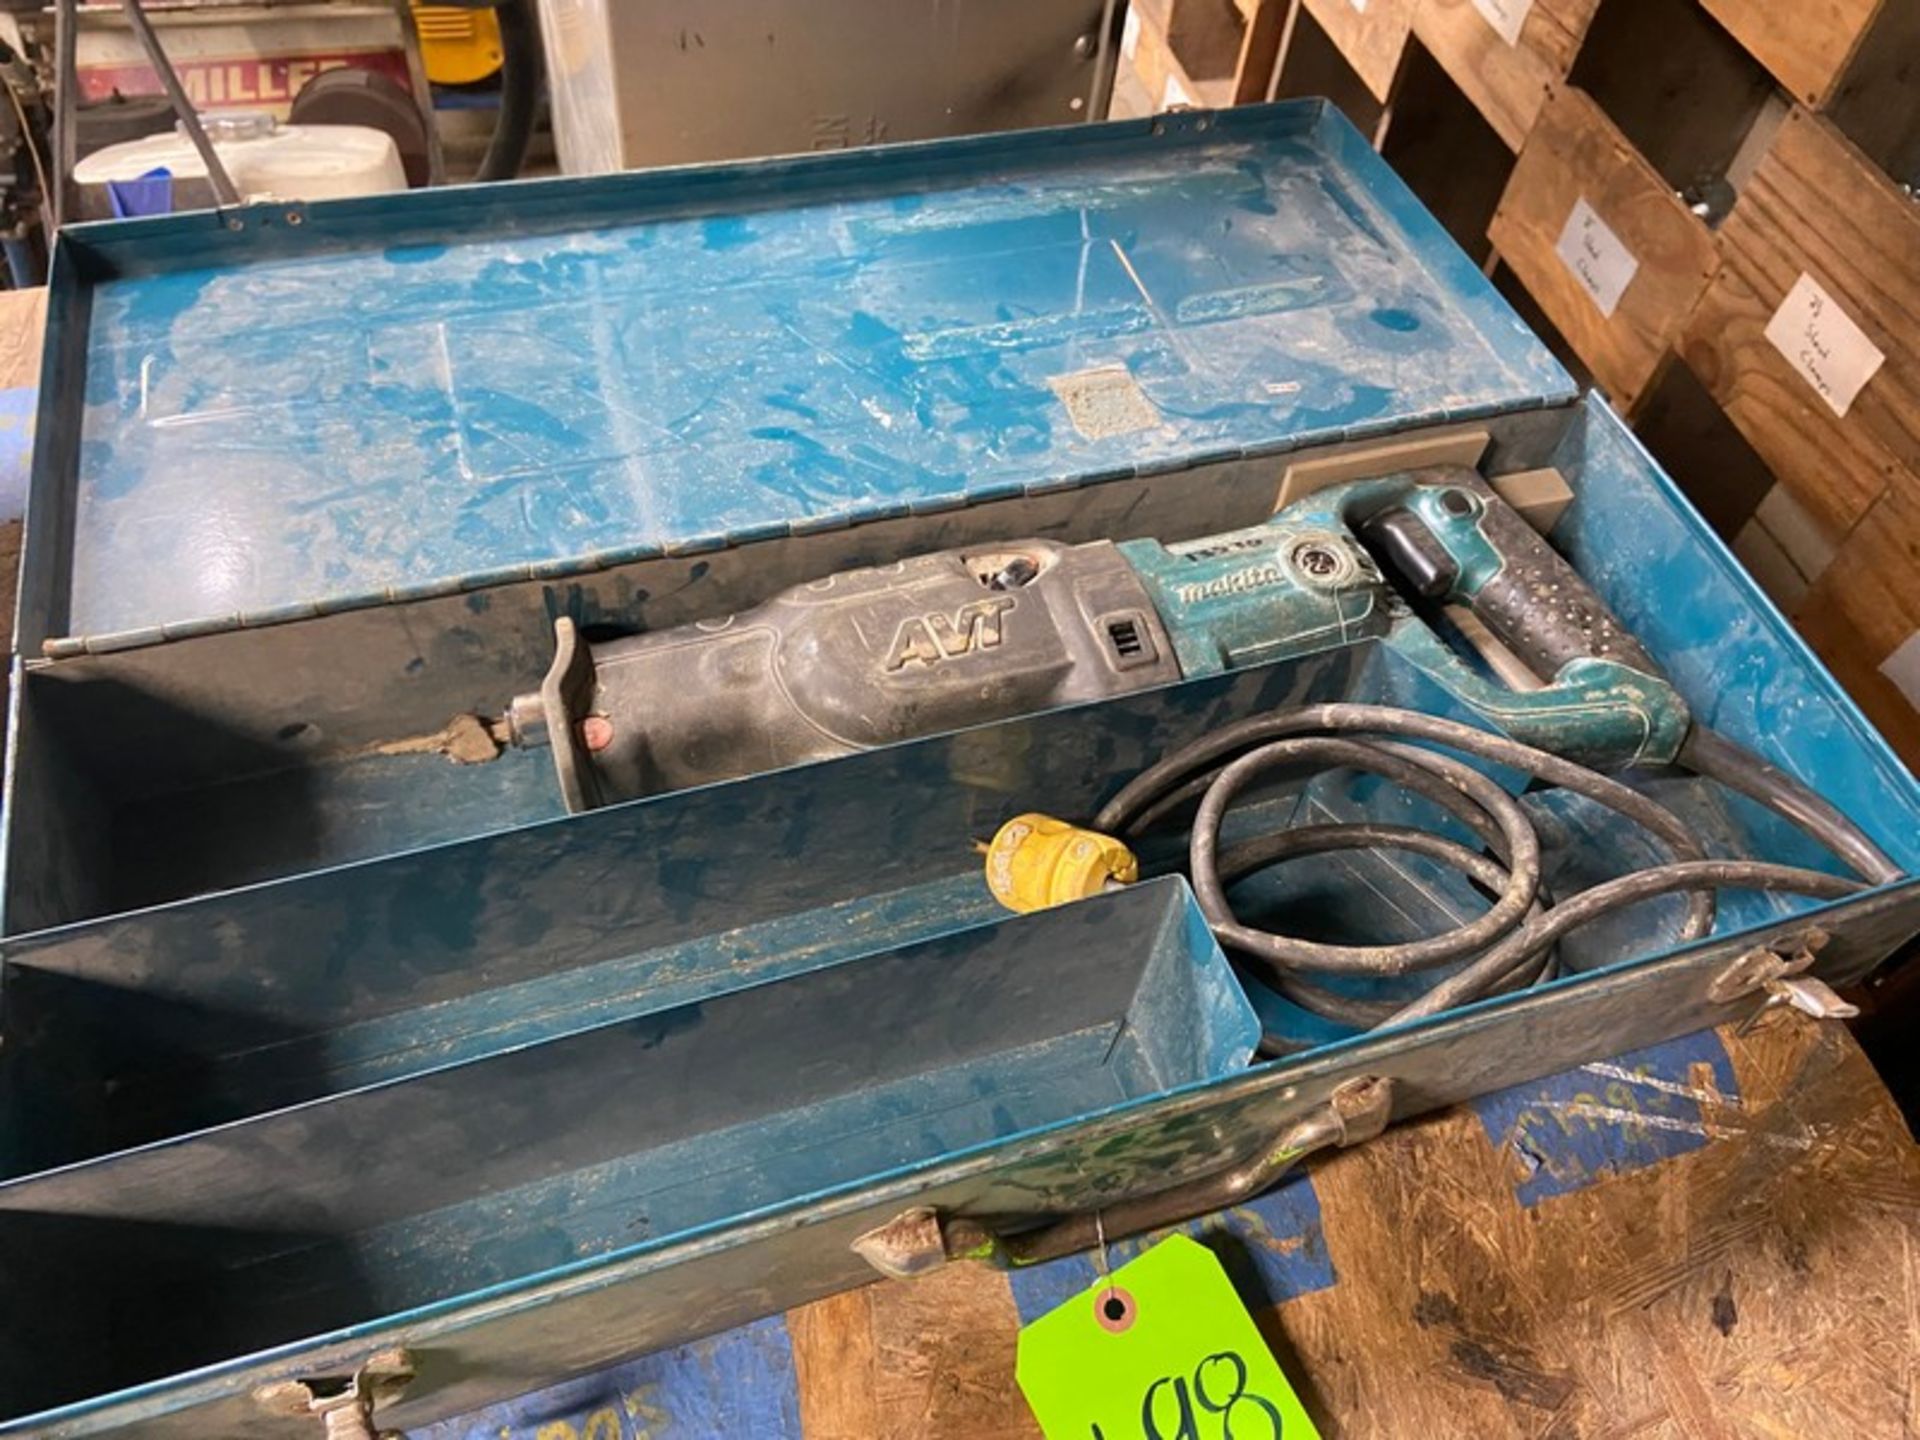 Makita AVT Sawzall Power Tool, S/N 13570, with Power Cord & Hard Case (LOCATED IN MONROEVILLE, PA)